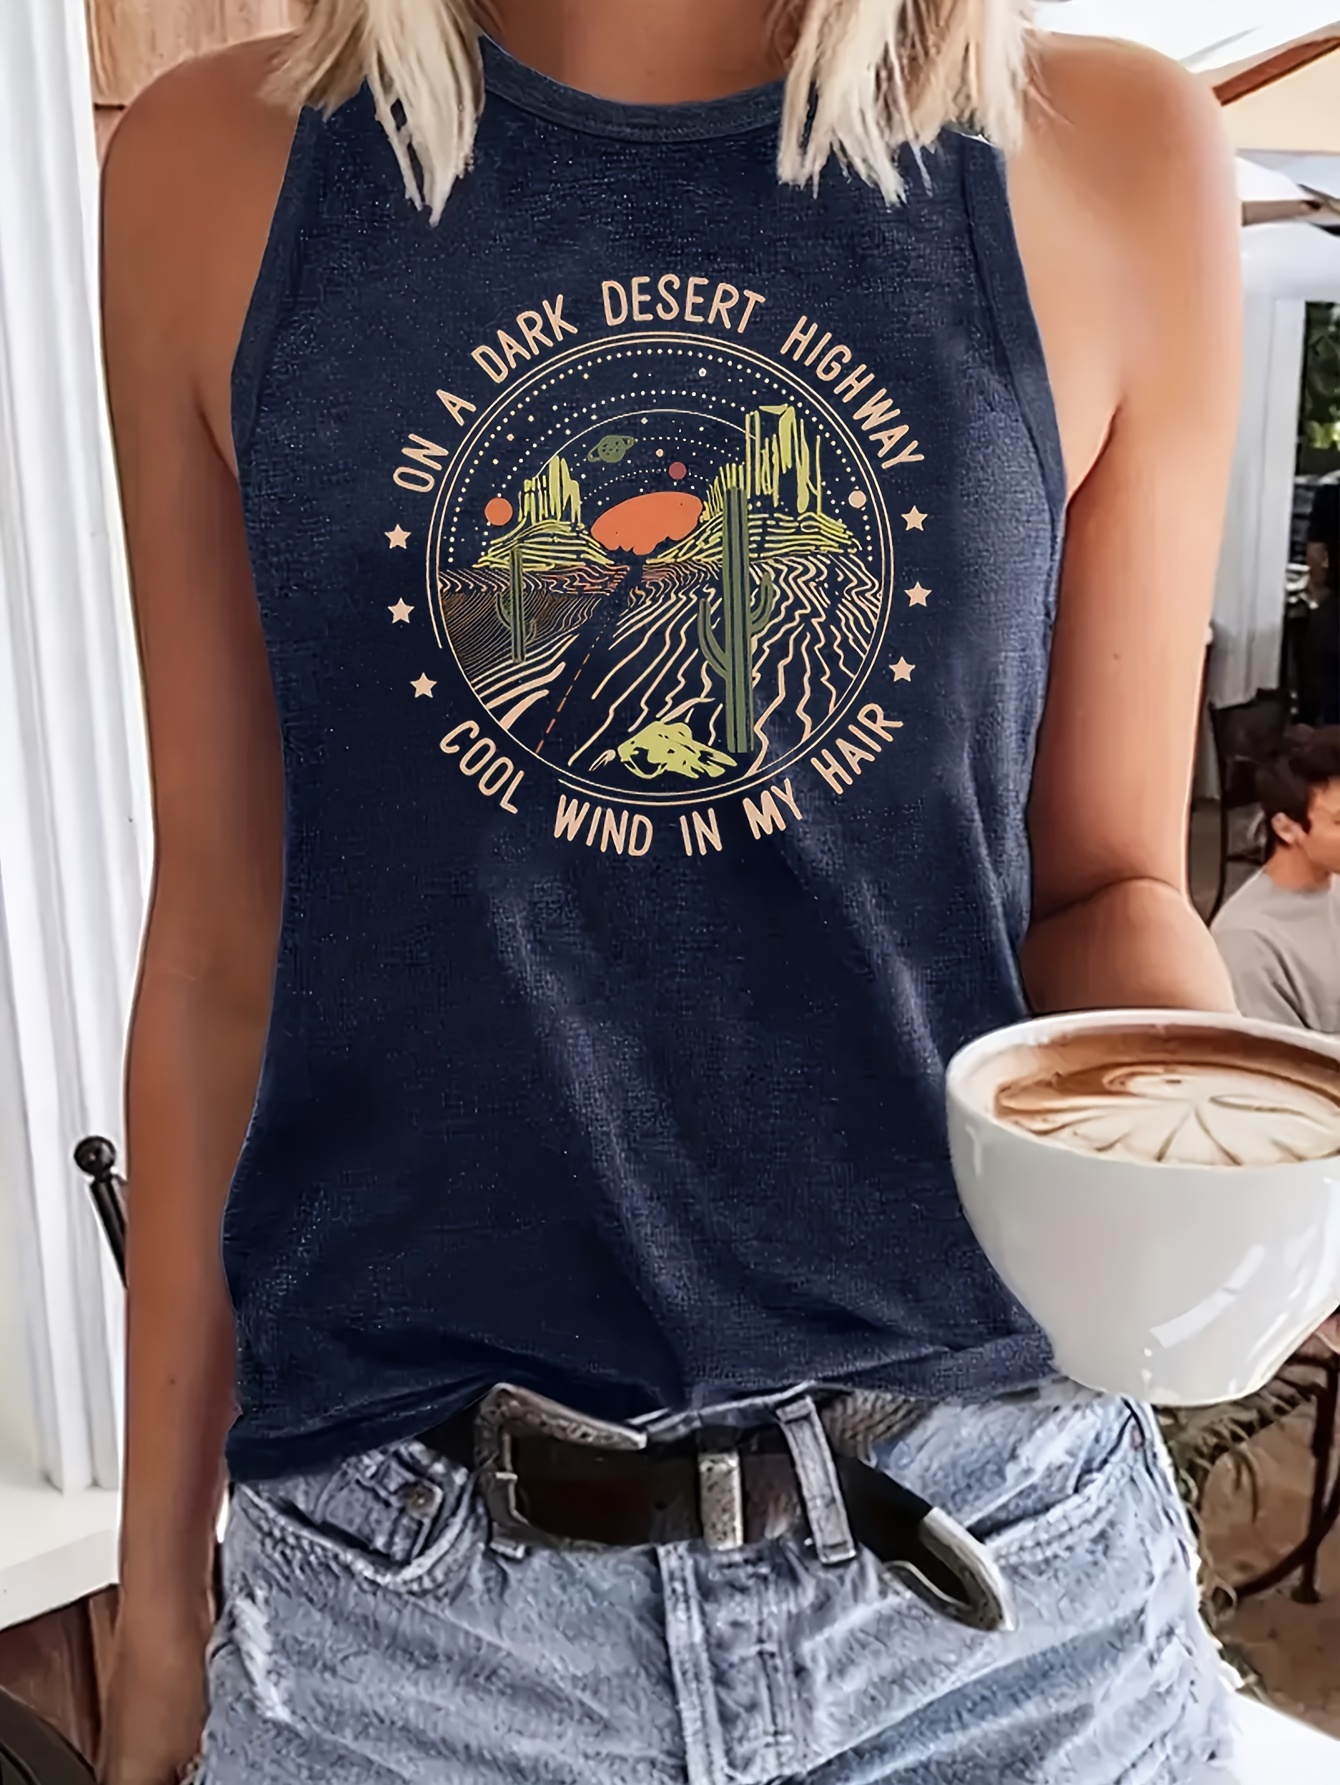 Graphic & Letter Print Crew Neck Tank Top, Casual Sleeveless Top For Spring & Summer, Women's Clothing